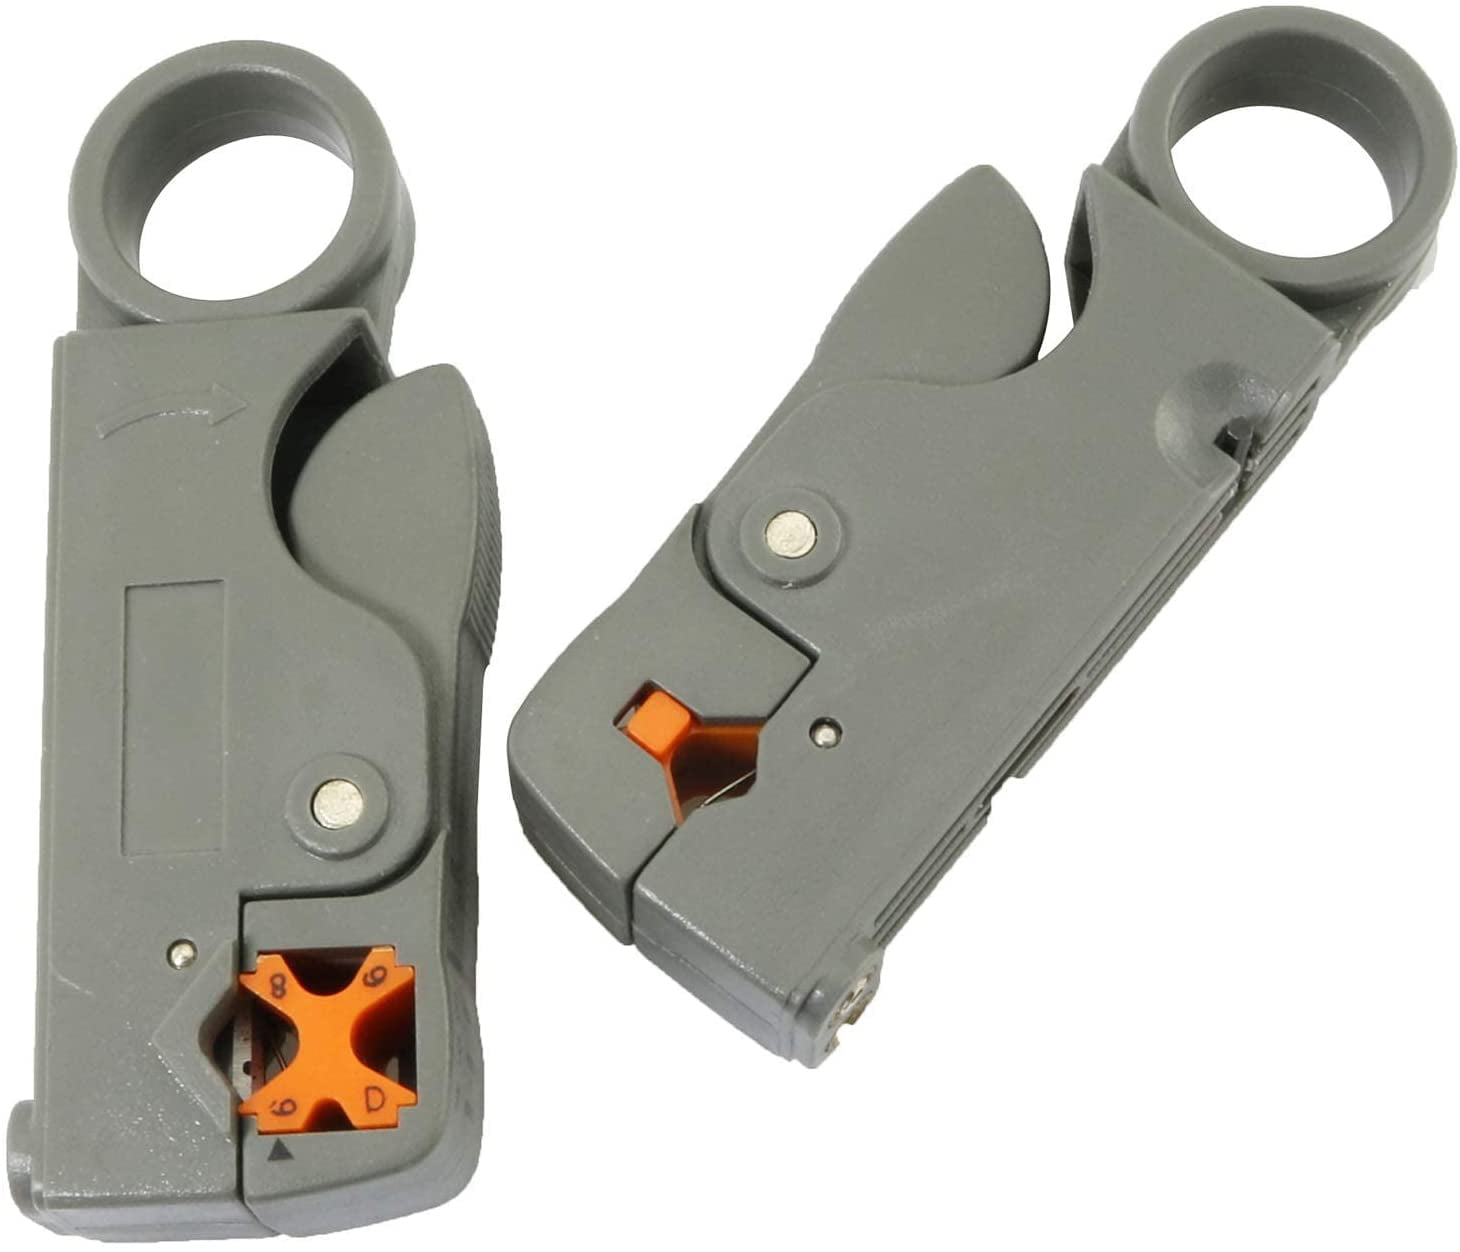 RG59/62 and RG58 Coaxial Cable Stripper 2-blades model for RG6 